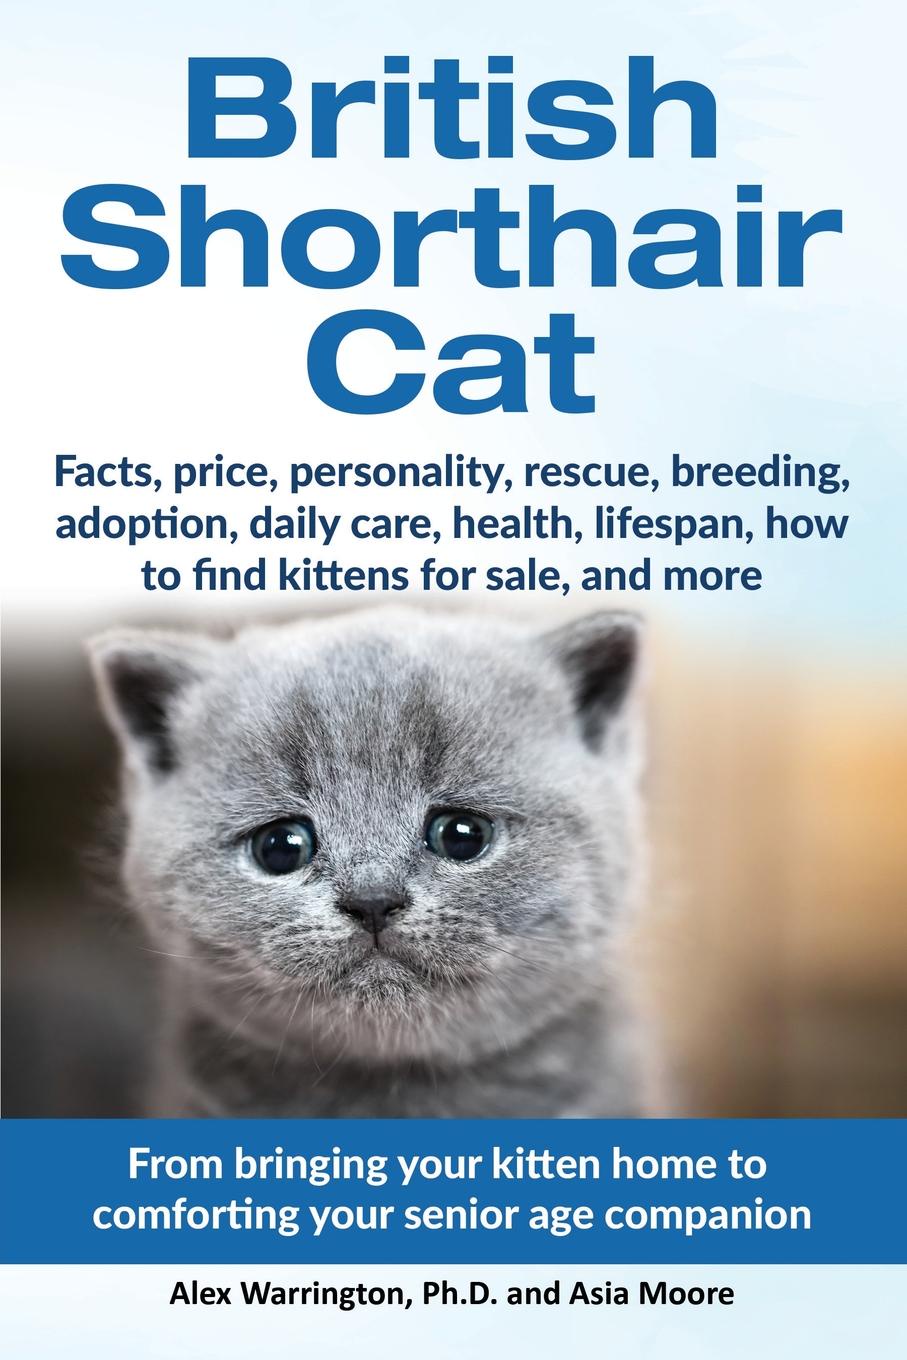 British Shorthair Cat. From bringing your kitten home to comforting your senior age beloved companion